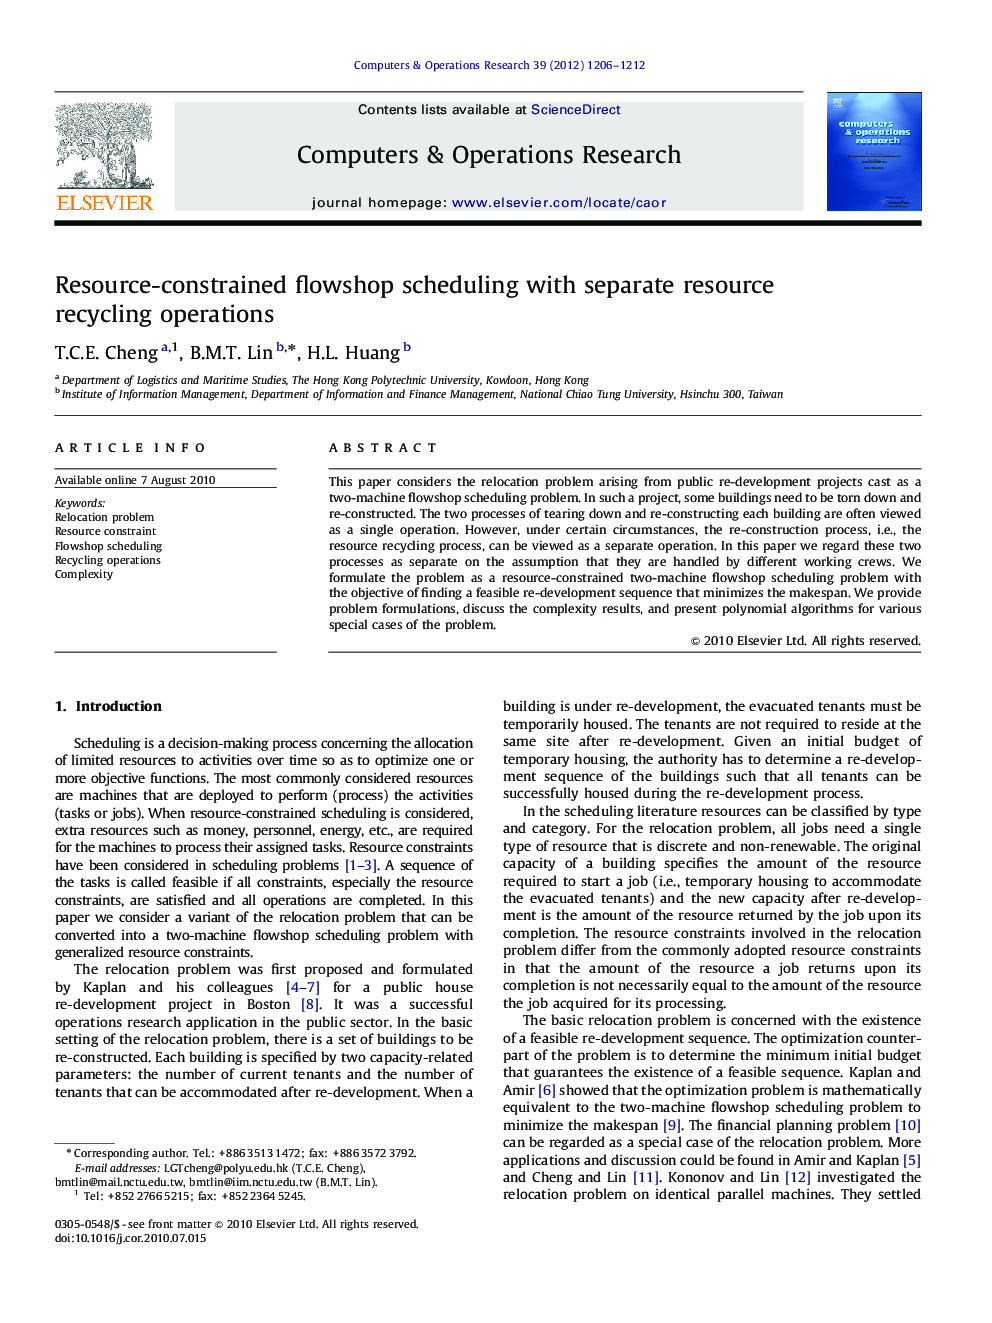 Resource-constrained flowshop scheduling with separate resource recycling operations